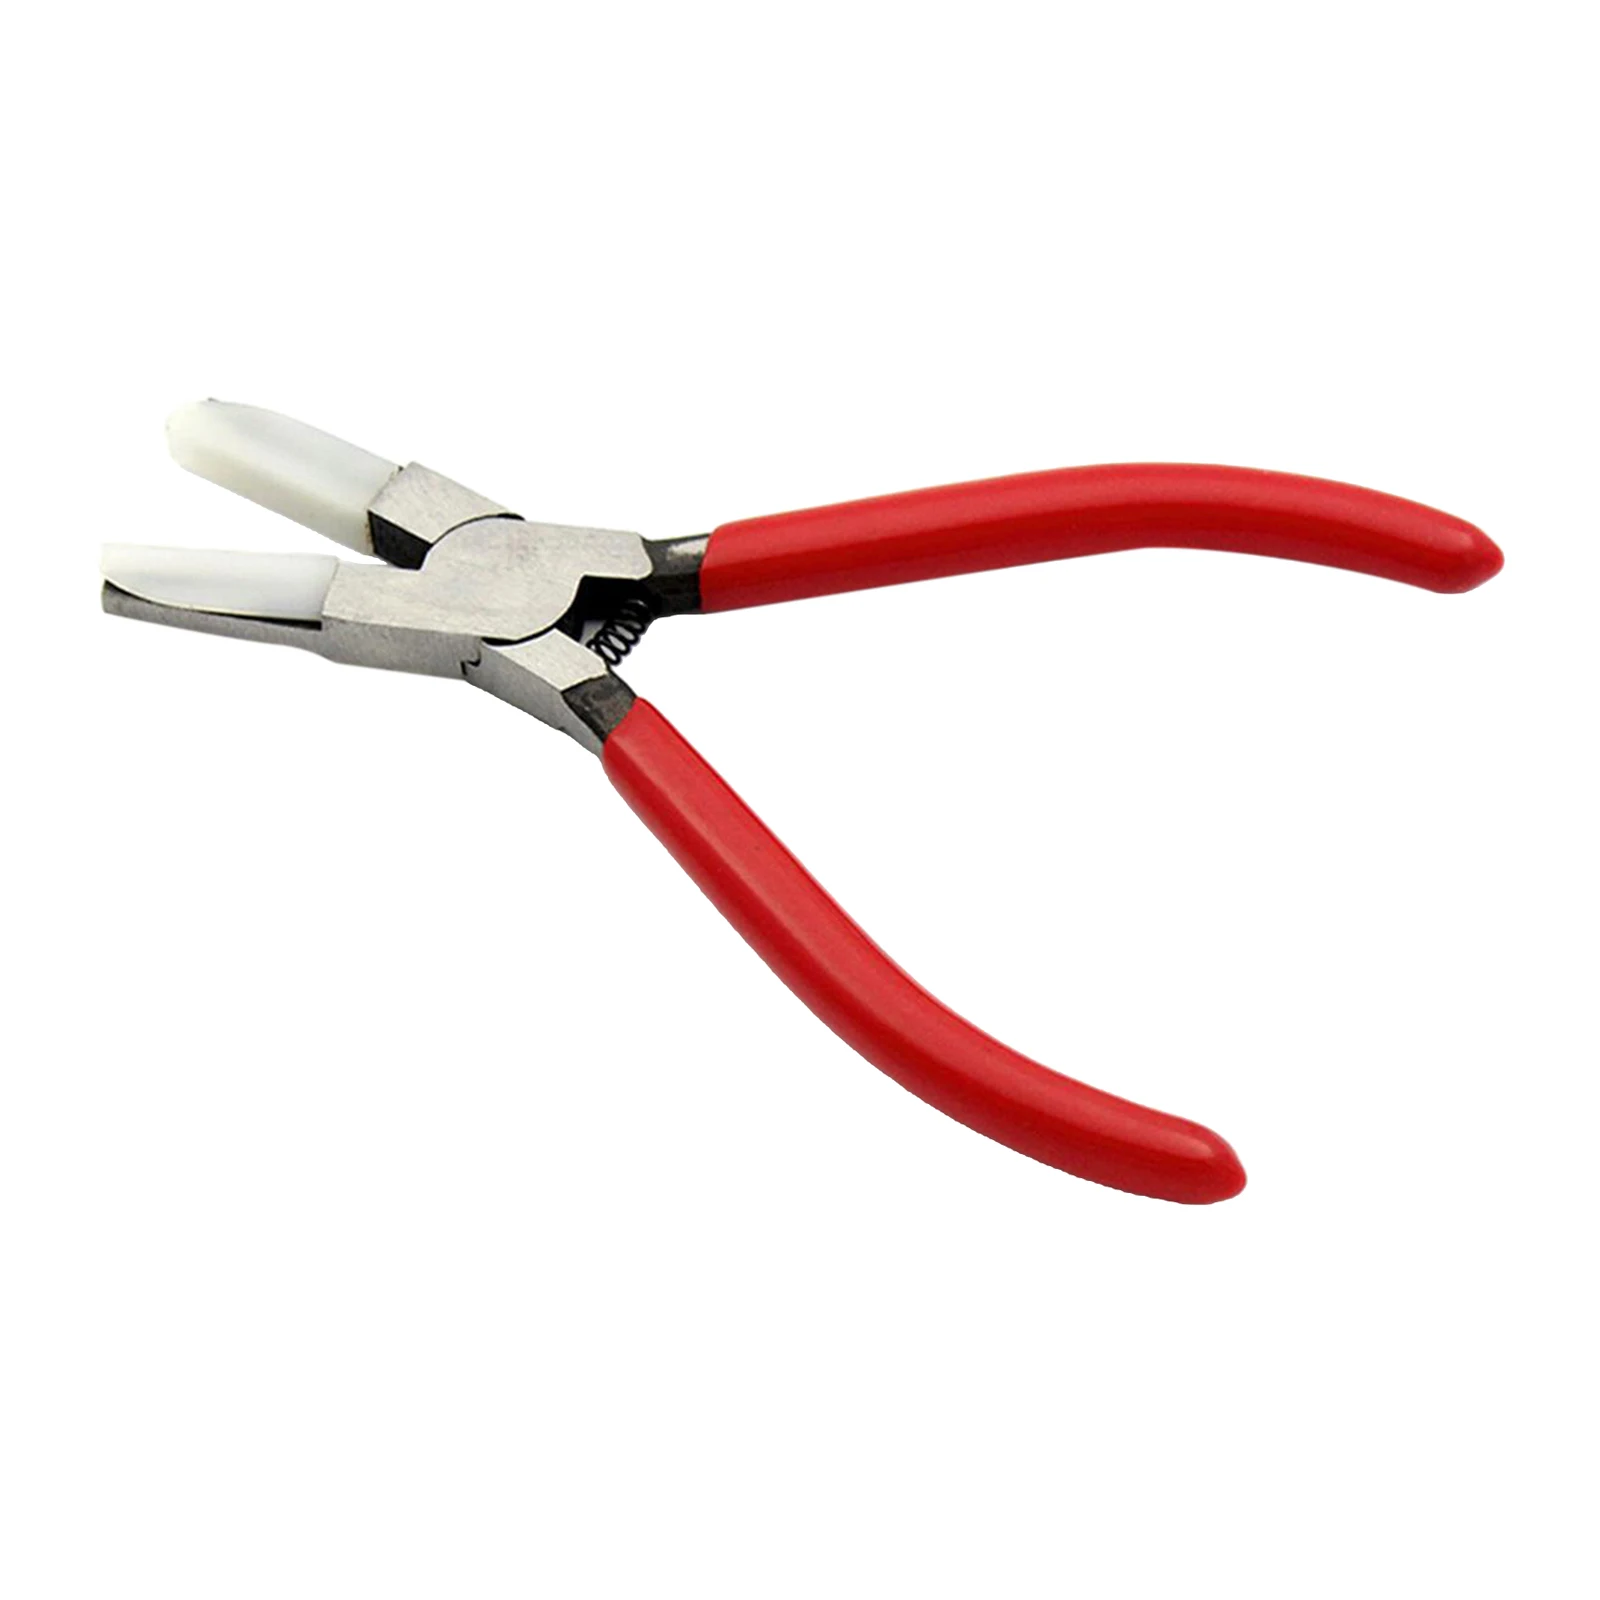 1PC Jaw Pliers Hand Pliers Toothless Flat Nose Pliers Flat Mouth Flat Nose Pliers Diagonal Cutting Plier